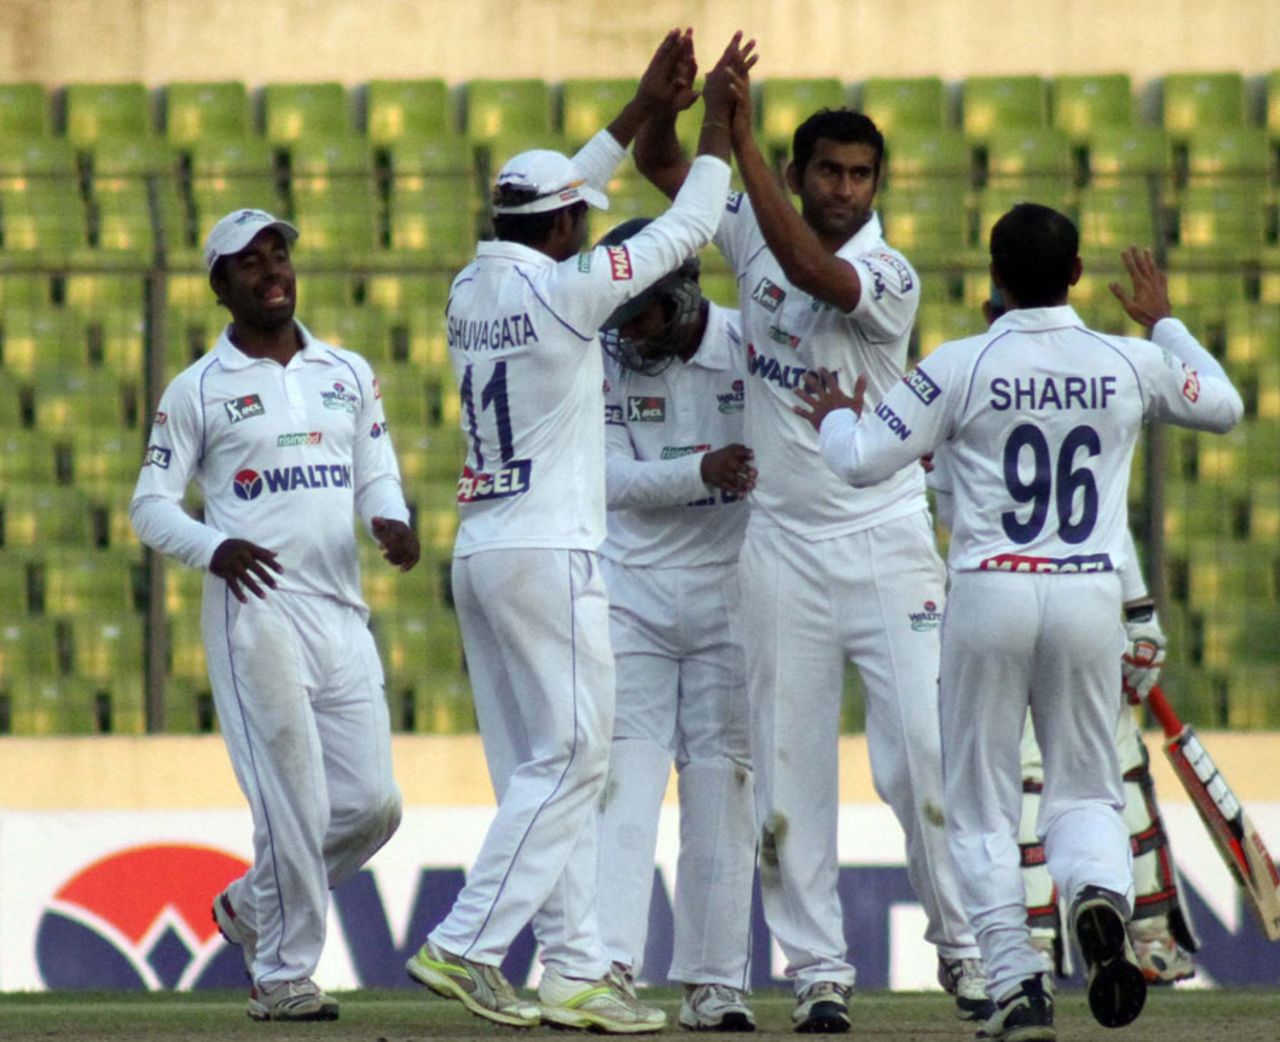 Central Zone's Mosharraf Hossain celebrates a wicket with his team-mates, Central Zone v North Zone, BCL final, Mirpur, 2nd day, February 23, 2013